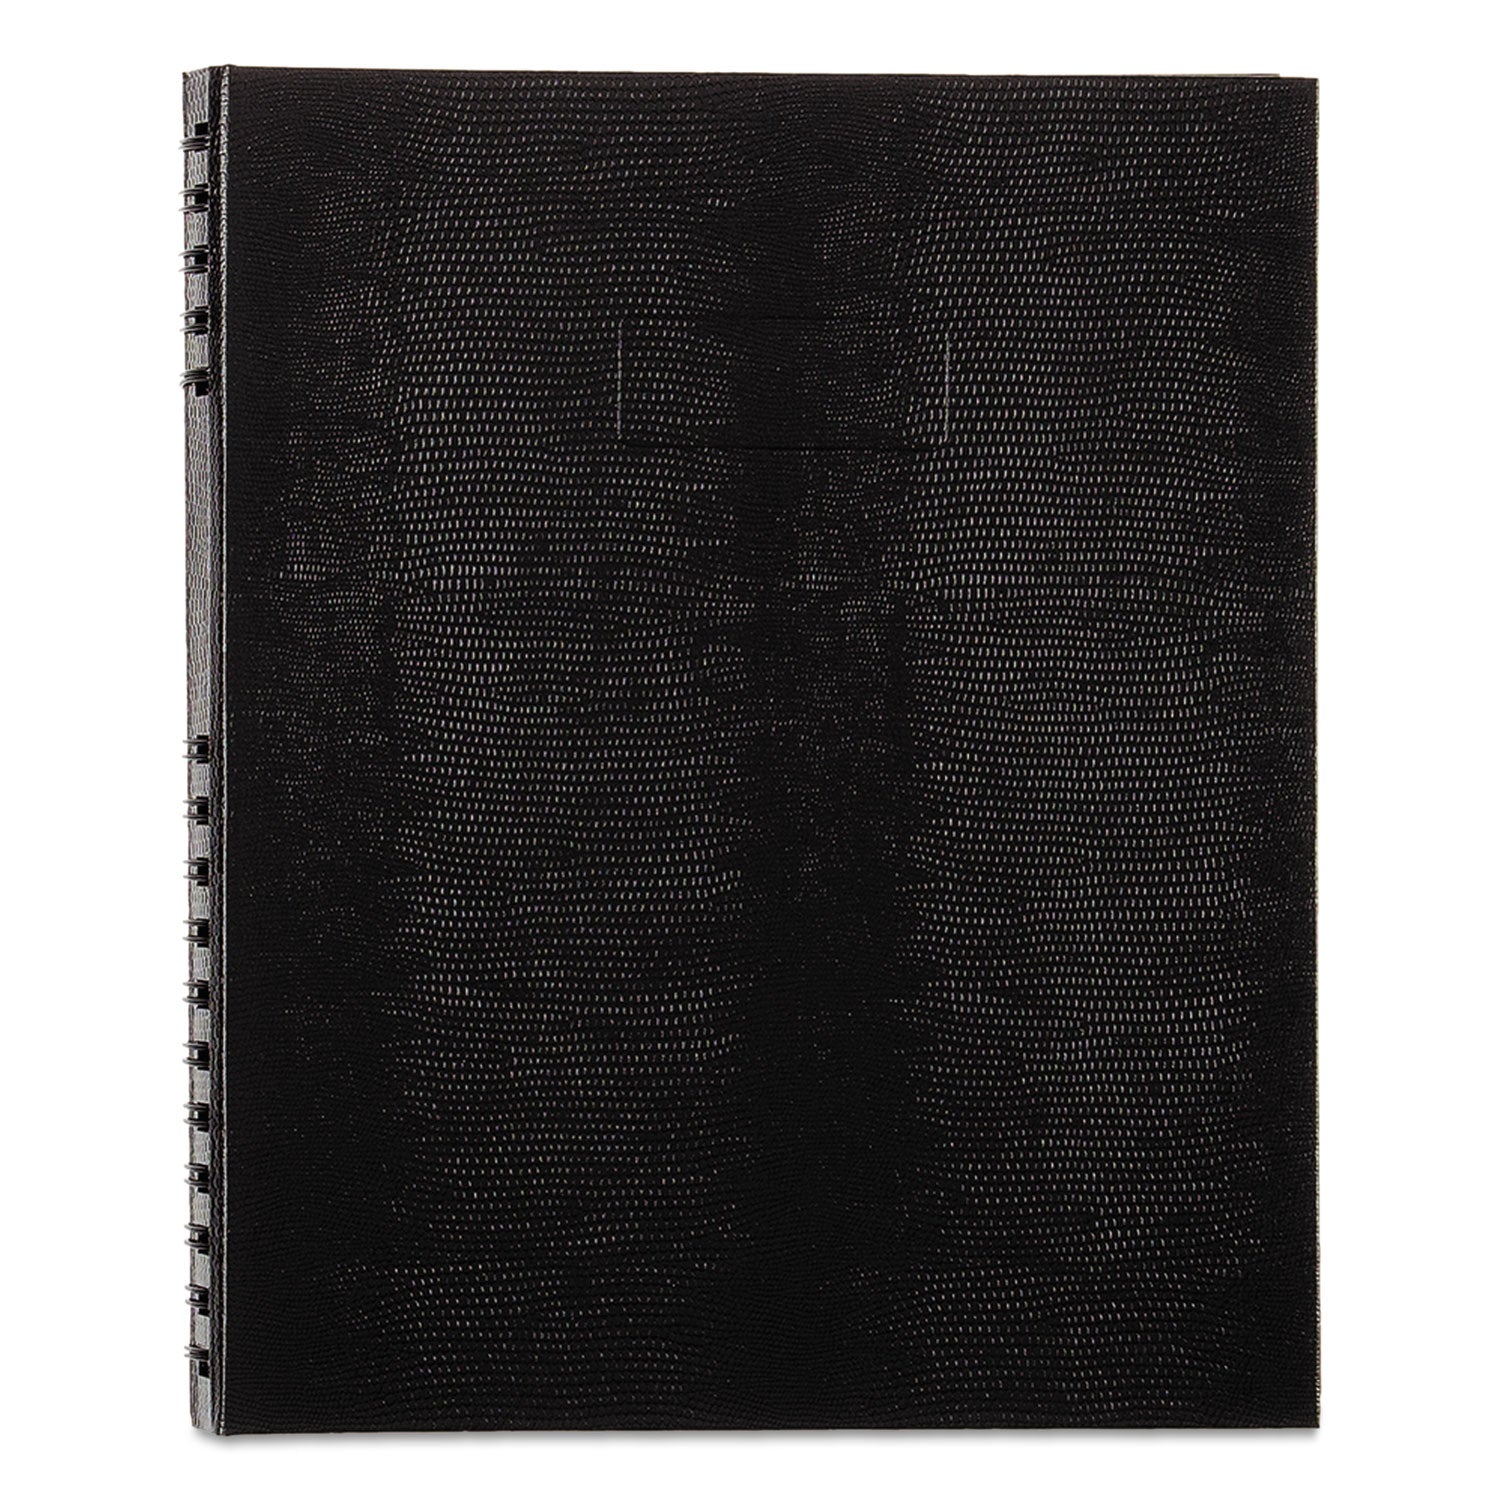 NotePro Notebook, 1-Subject, Medium/College Rule, Black Cover, (100) 11 x 8.5 Sheets - 